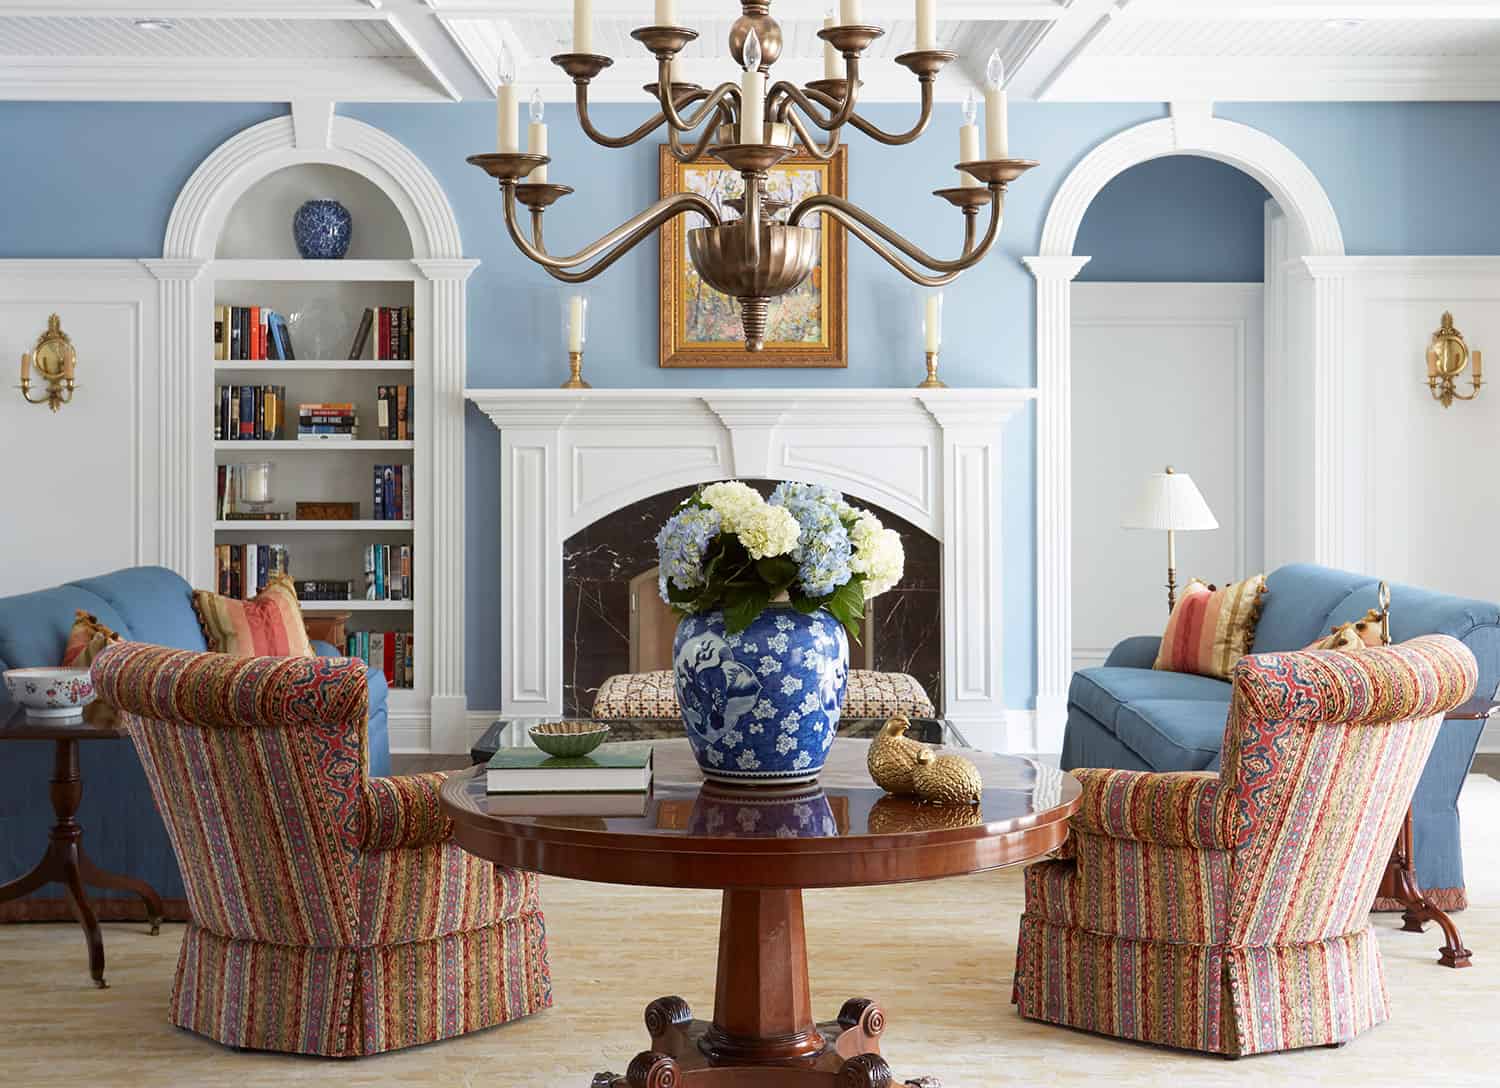 symmetrical-arched-openings-in-living-room